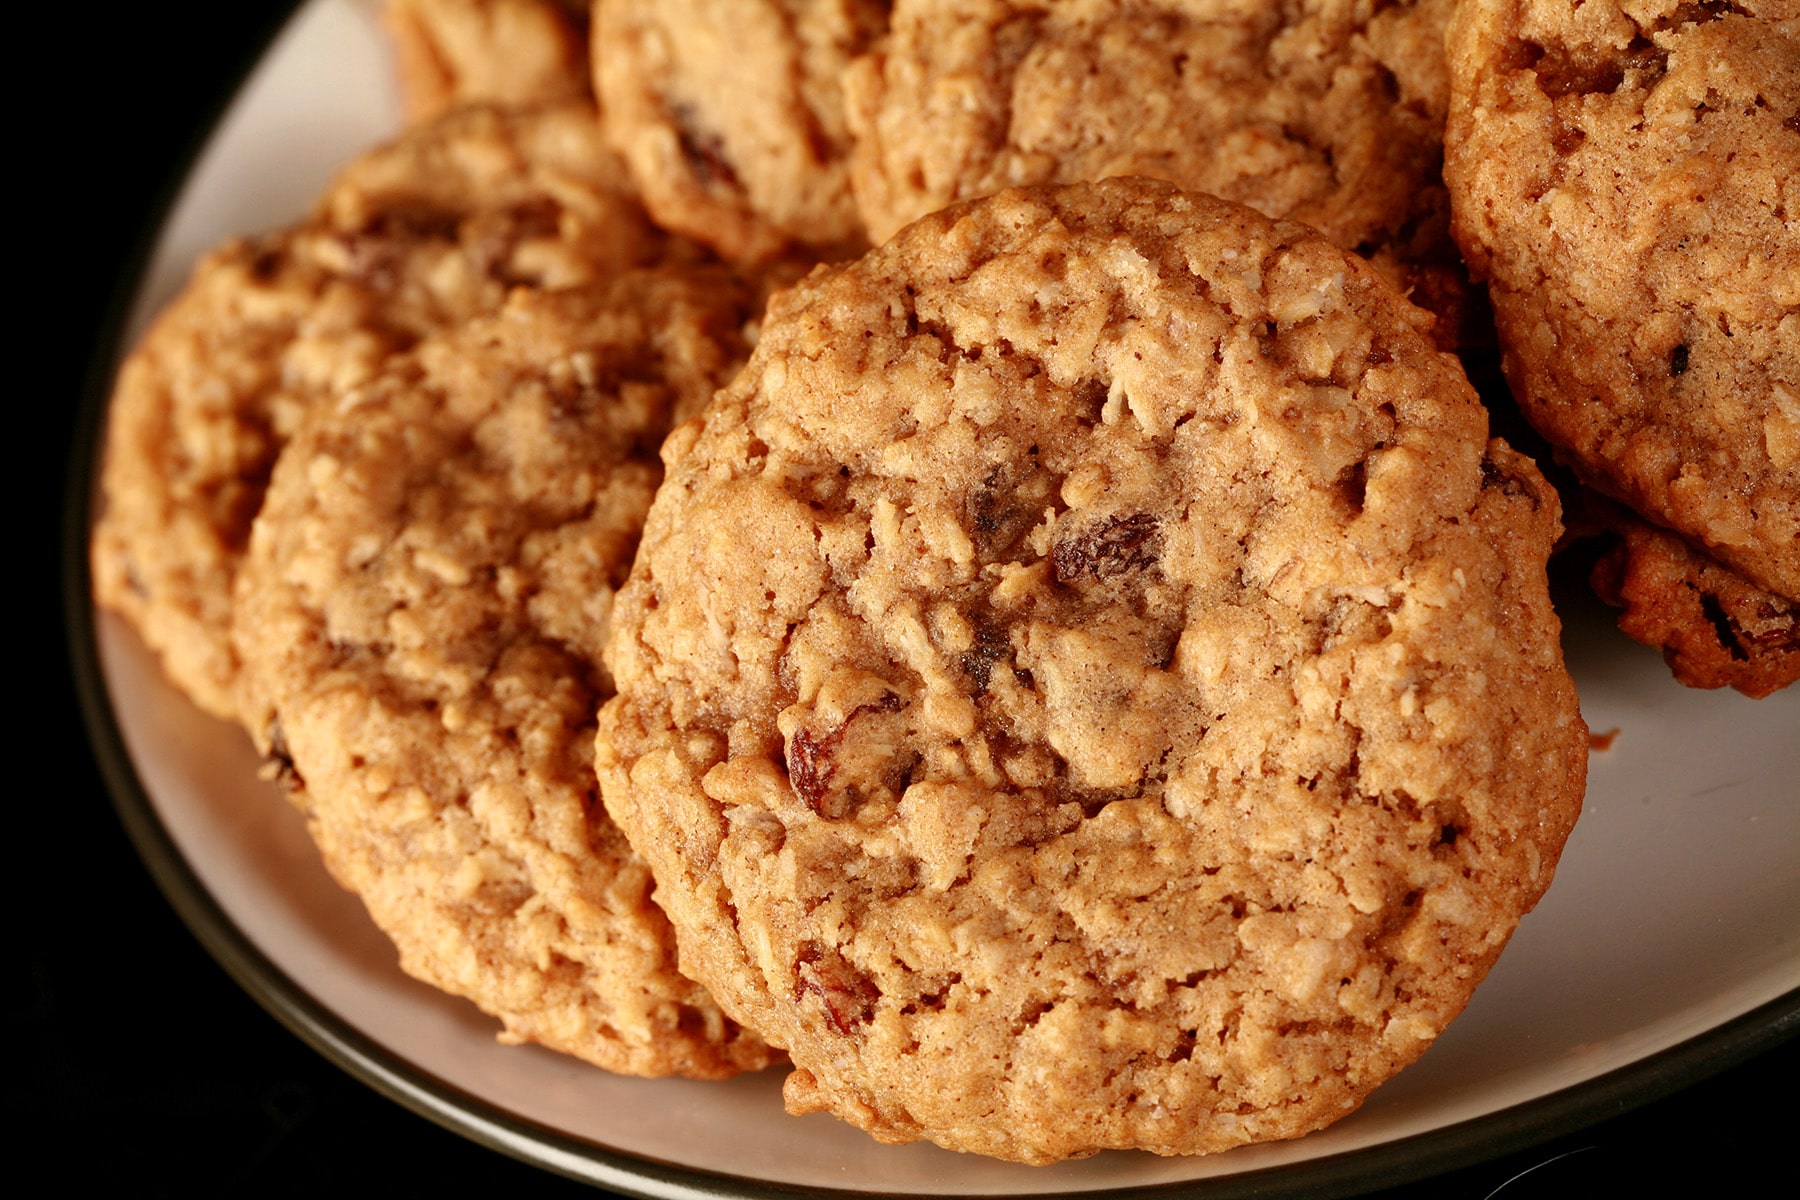 A plate of the best oatmeal raisin cookies ever.